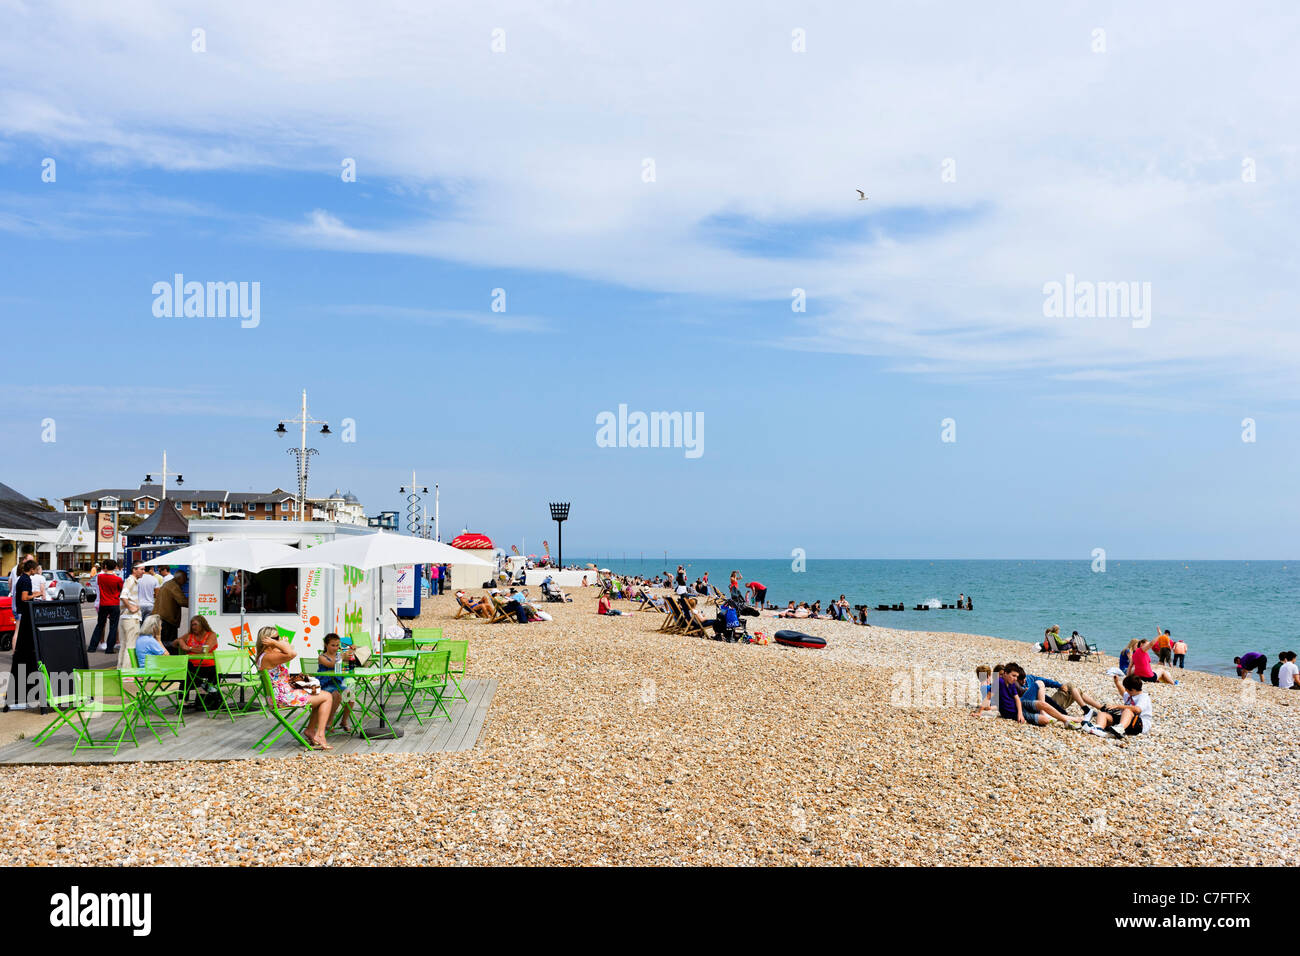 Cafe on the beach at Bognor Regis, West Sussex, England, UK Stock Photo